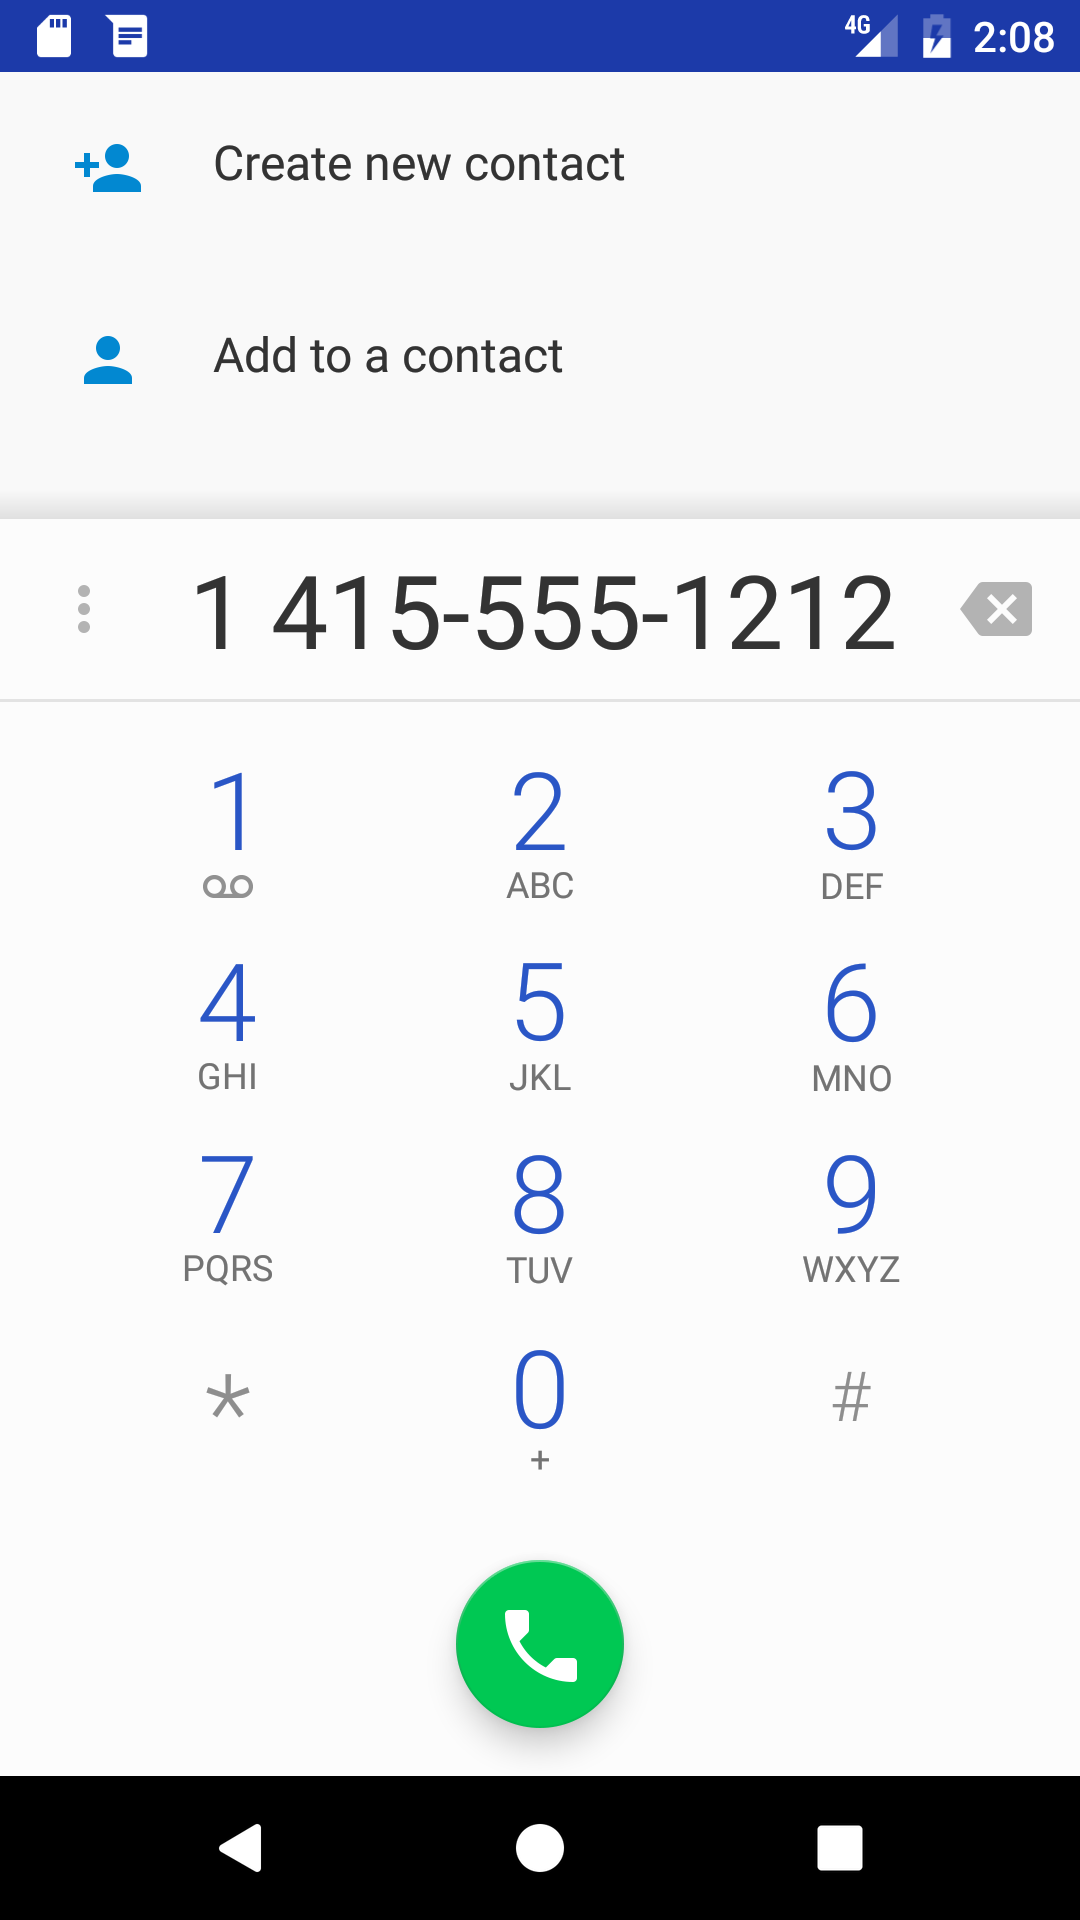 The dialer in the Phone app